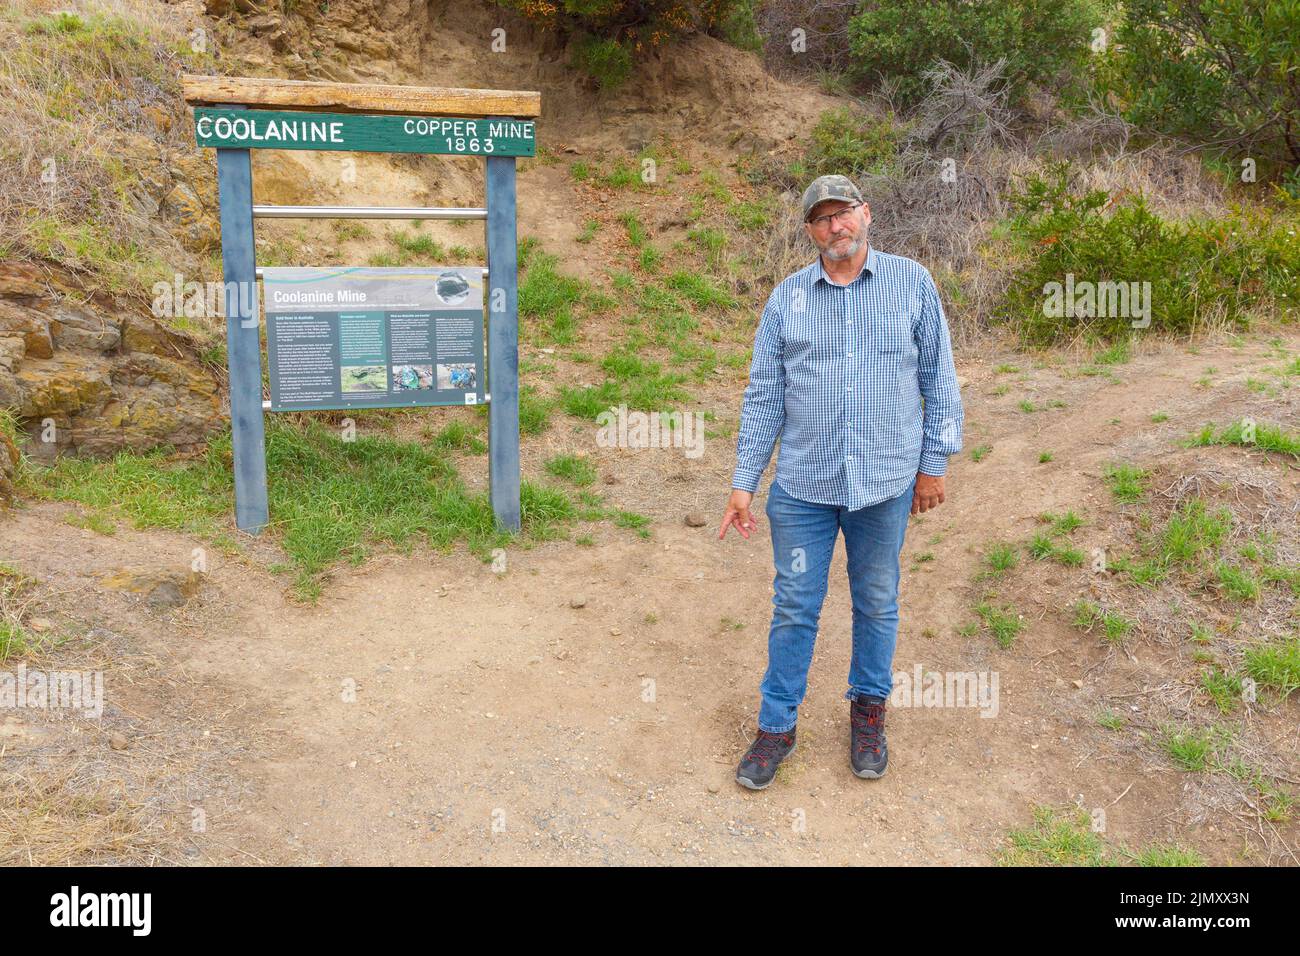 Andrew McIntyre, a resident of Adelaide in South Australia, pictured at the Rosetta Head bluff on Encounter Bay in Victor Harbor, South Australia. Stock Photo